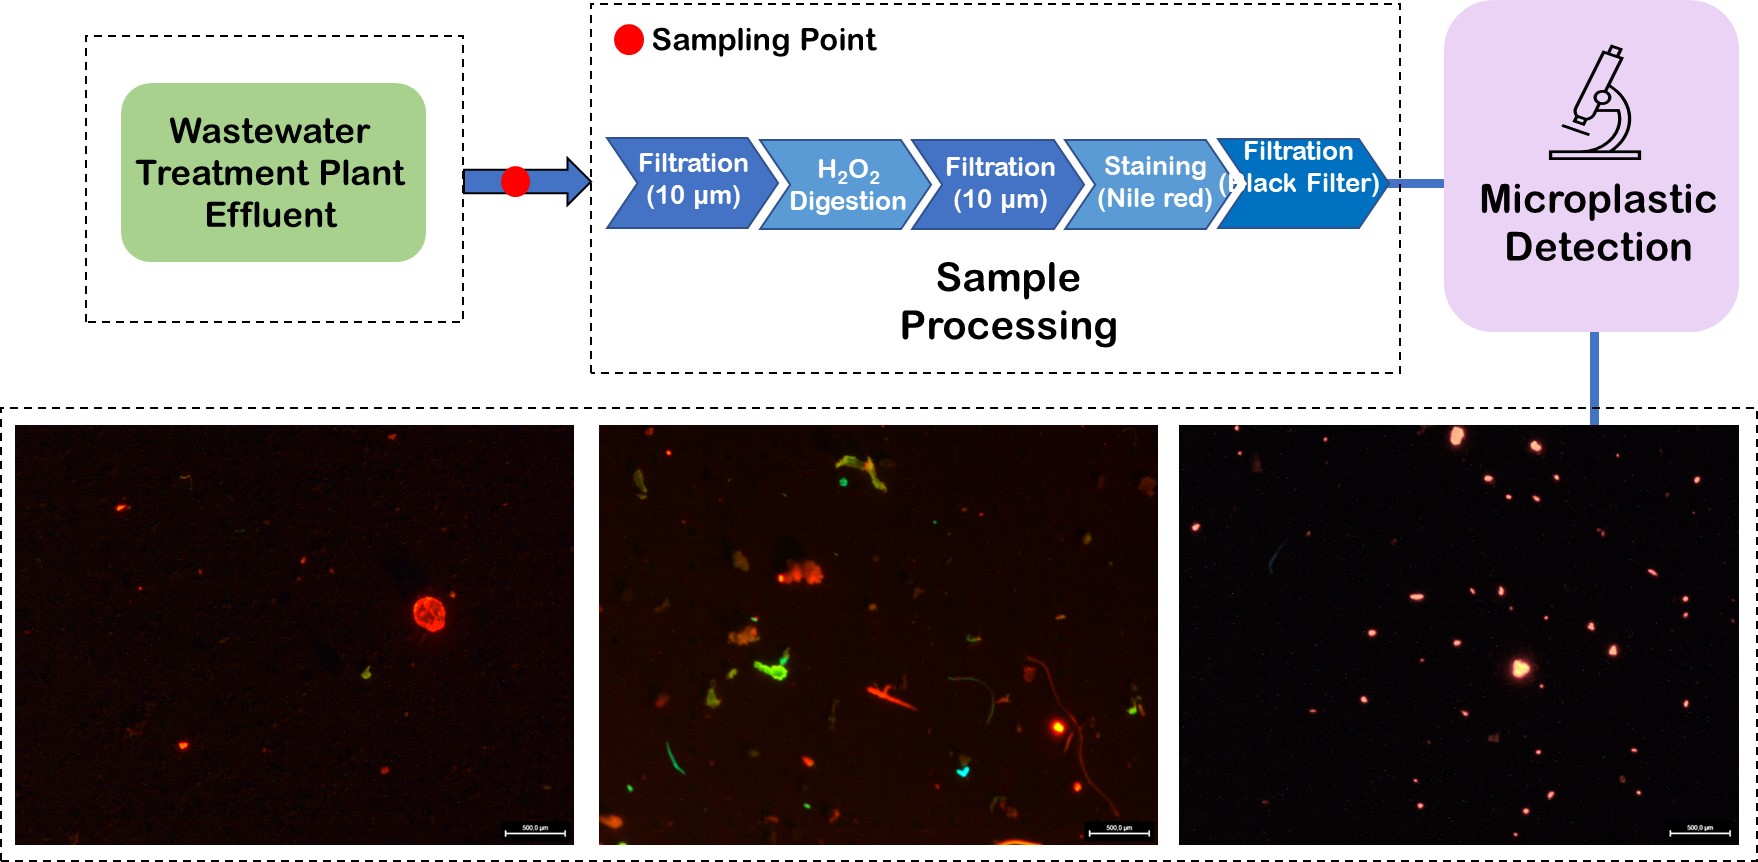 Overview of the sampling process and examples of resulting fluorescent images used for the automated microplastic particle counting. 